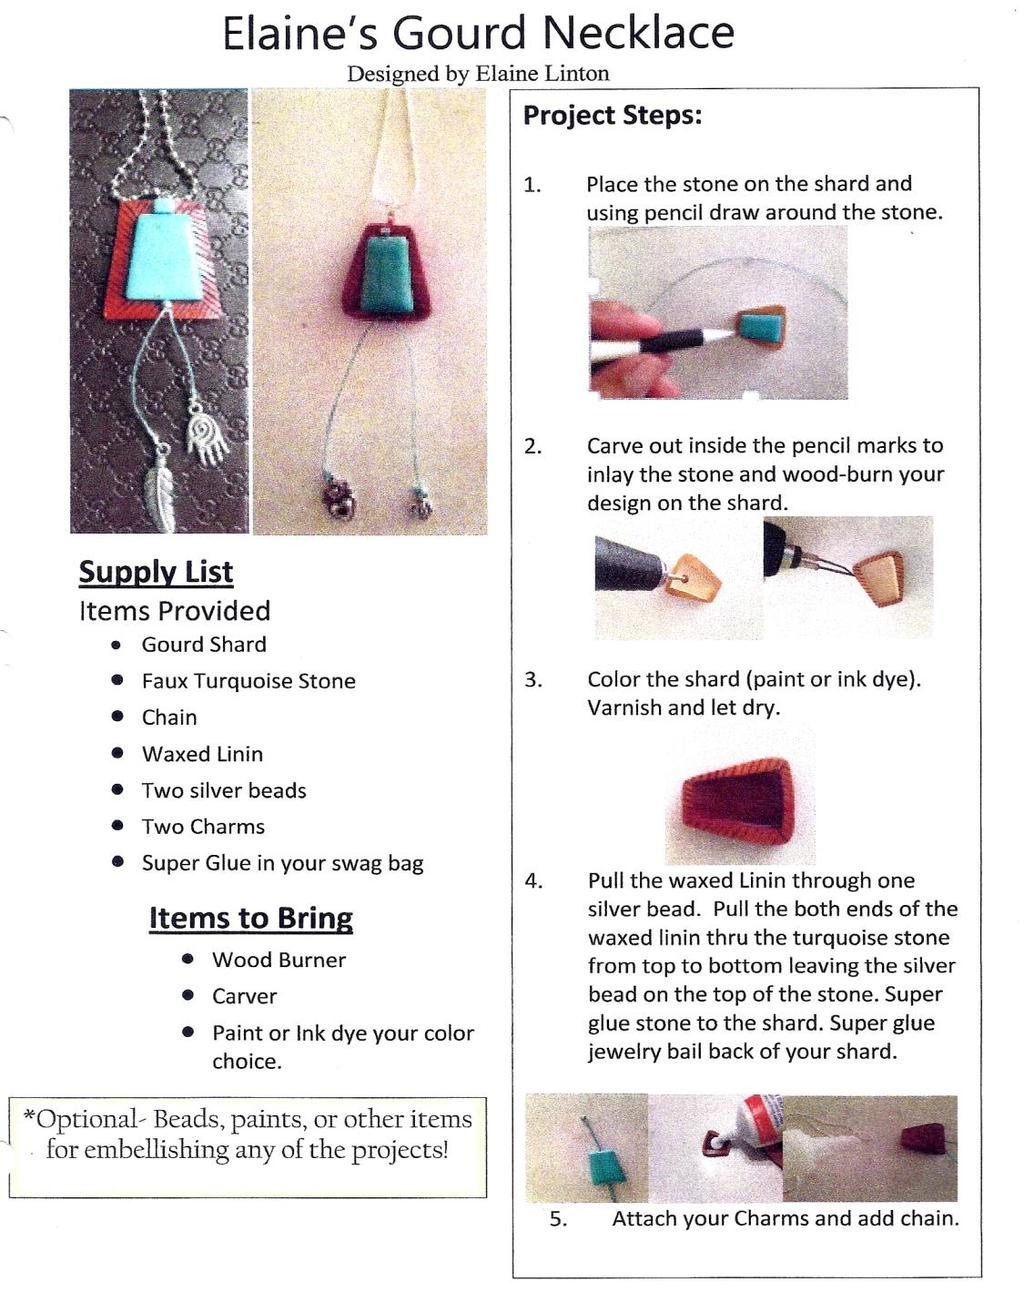 PAGE 20 THE GOLDEN GOURD ELECTRONIC NEWSLETTER FA LL 2015 VOLUME 17, ISSUE 3 (Continued on Page 26) Gourd Shard Faux Turquoise Stone Chain Waxed Linen Two Silver Beads Two Charms Super Glue Pull the